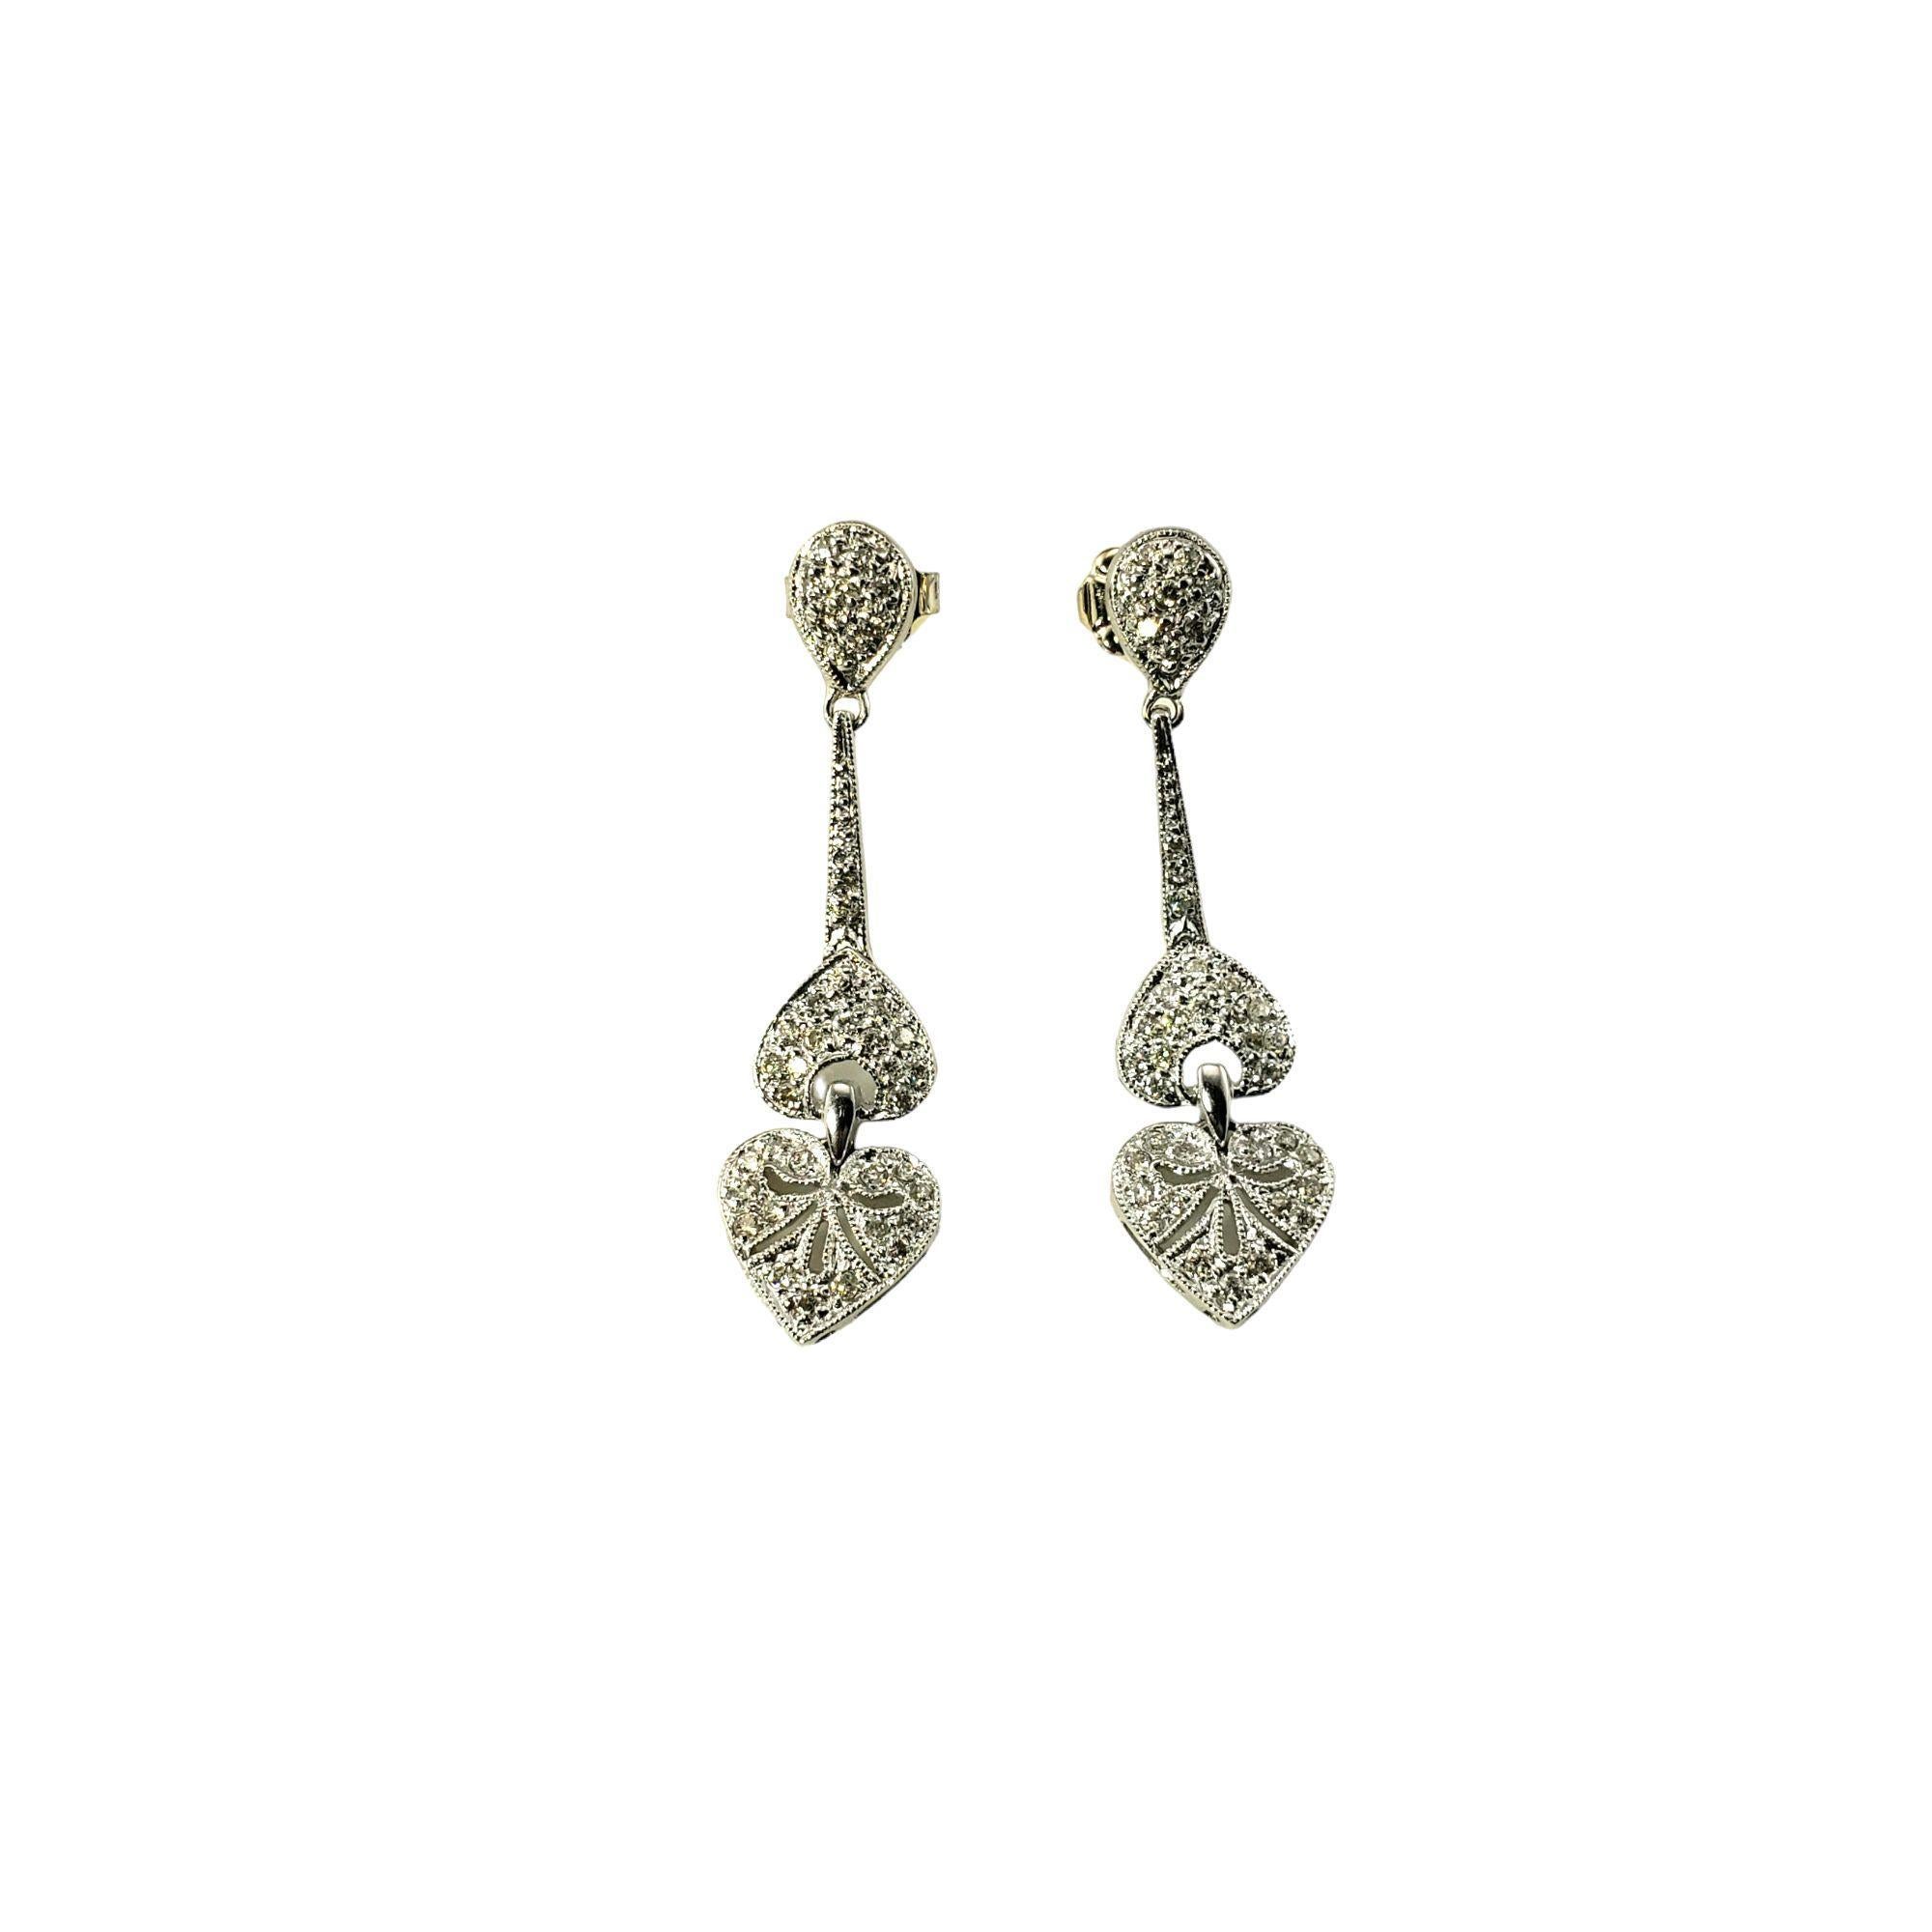 18 Karat White Gold and Diamond Heart Dangle Earrings-

These sparkling dangling heart earrings each feature 40 round brilliant cut diamonds set in classic 18K white gold. Push back closures.

Approximate total diamond weight: .40 ct.

Diamond